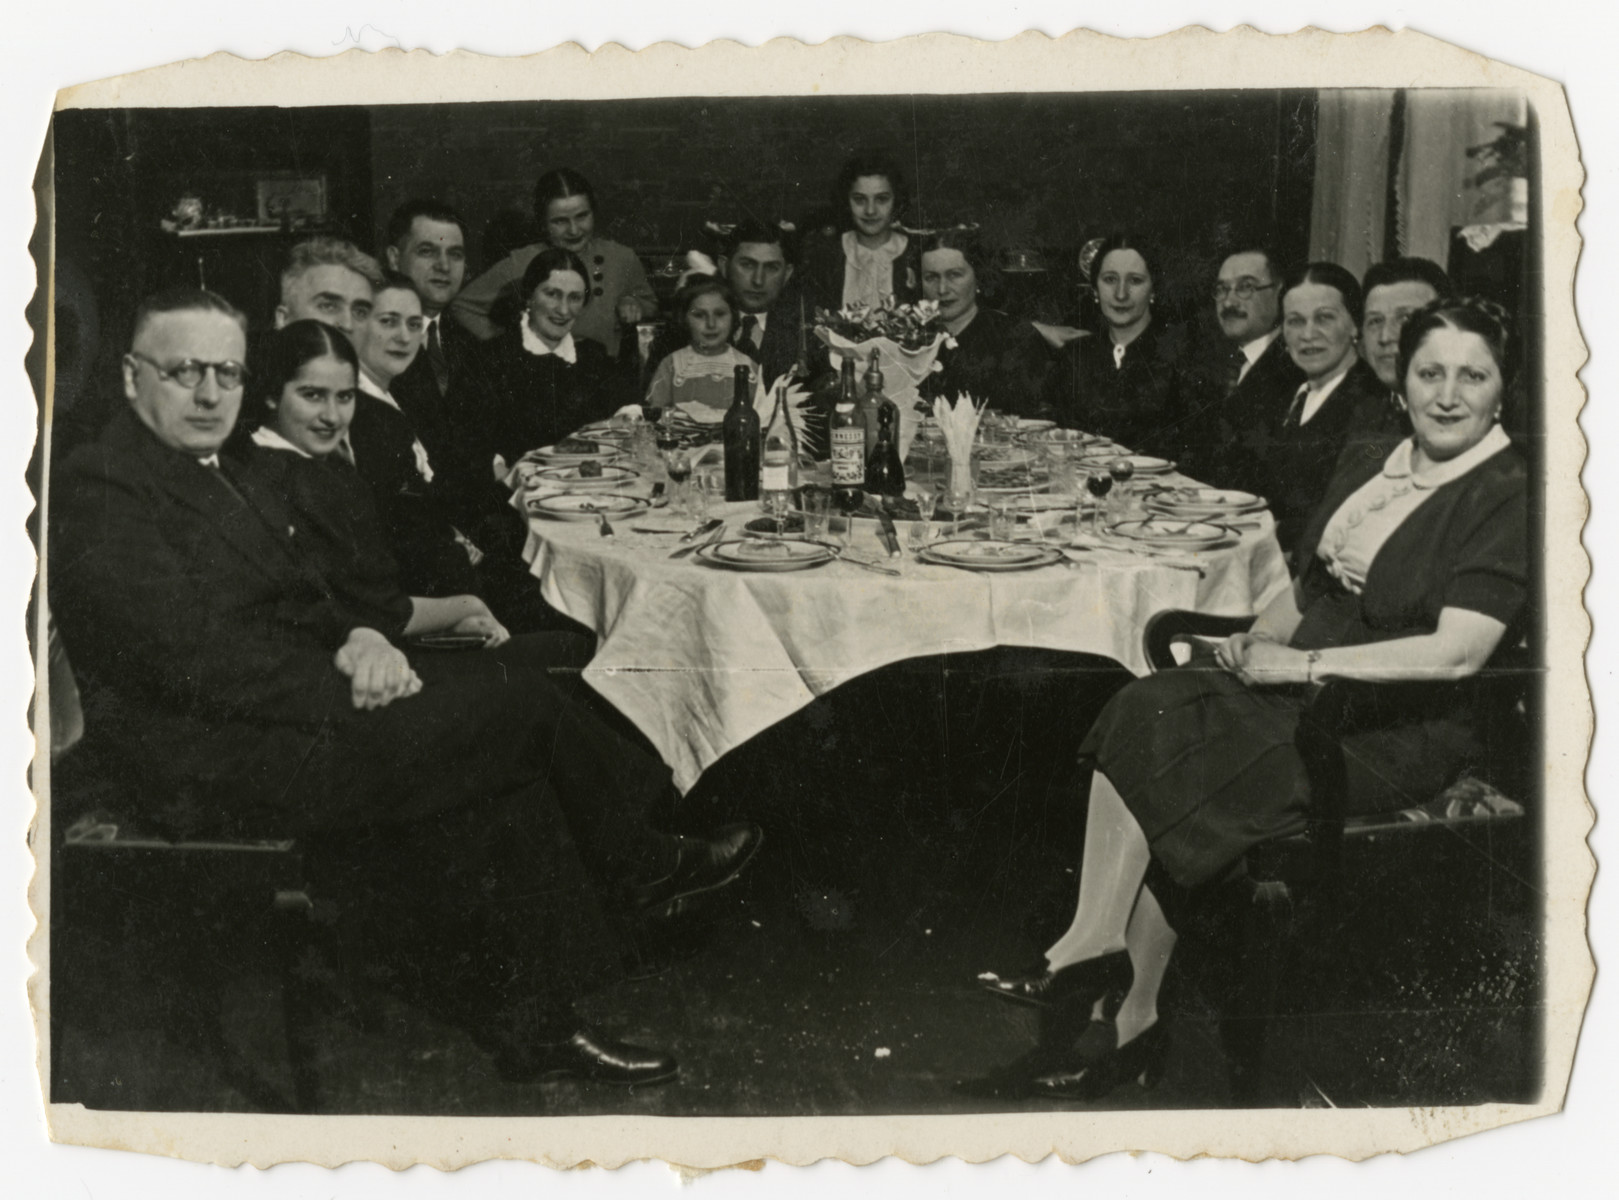 The Wajcblum and Jaglom families gather for a Passover seder in Brest.

Estusia Wajcblum is standing in the center, rear.  Seated at the head of the table is Moise Jaglom is holding his daughter Jeannette.  His wife Klara  is on the right with the pearl earrings.